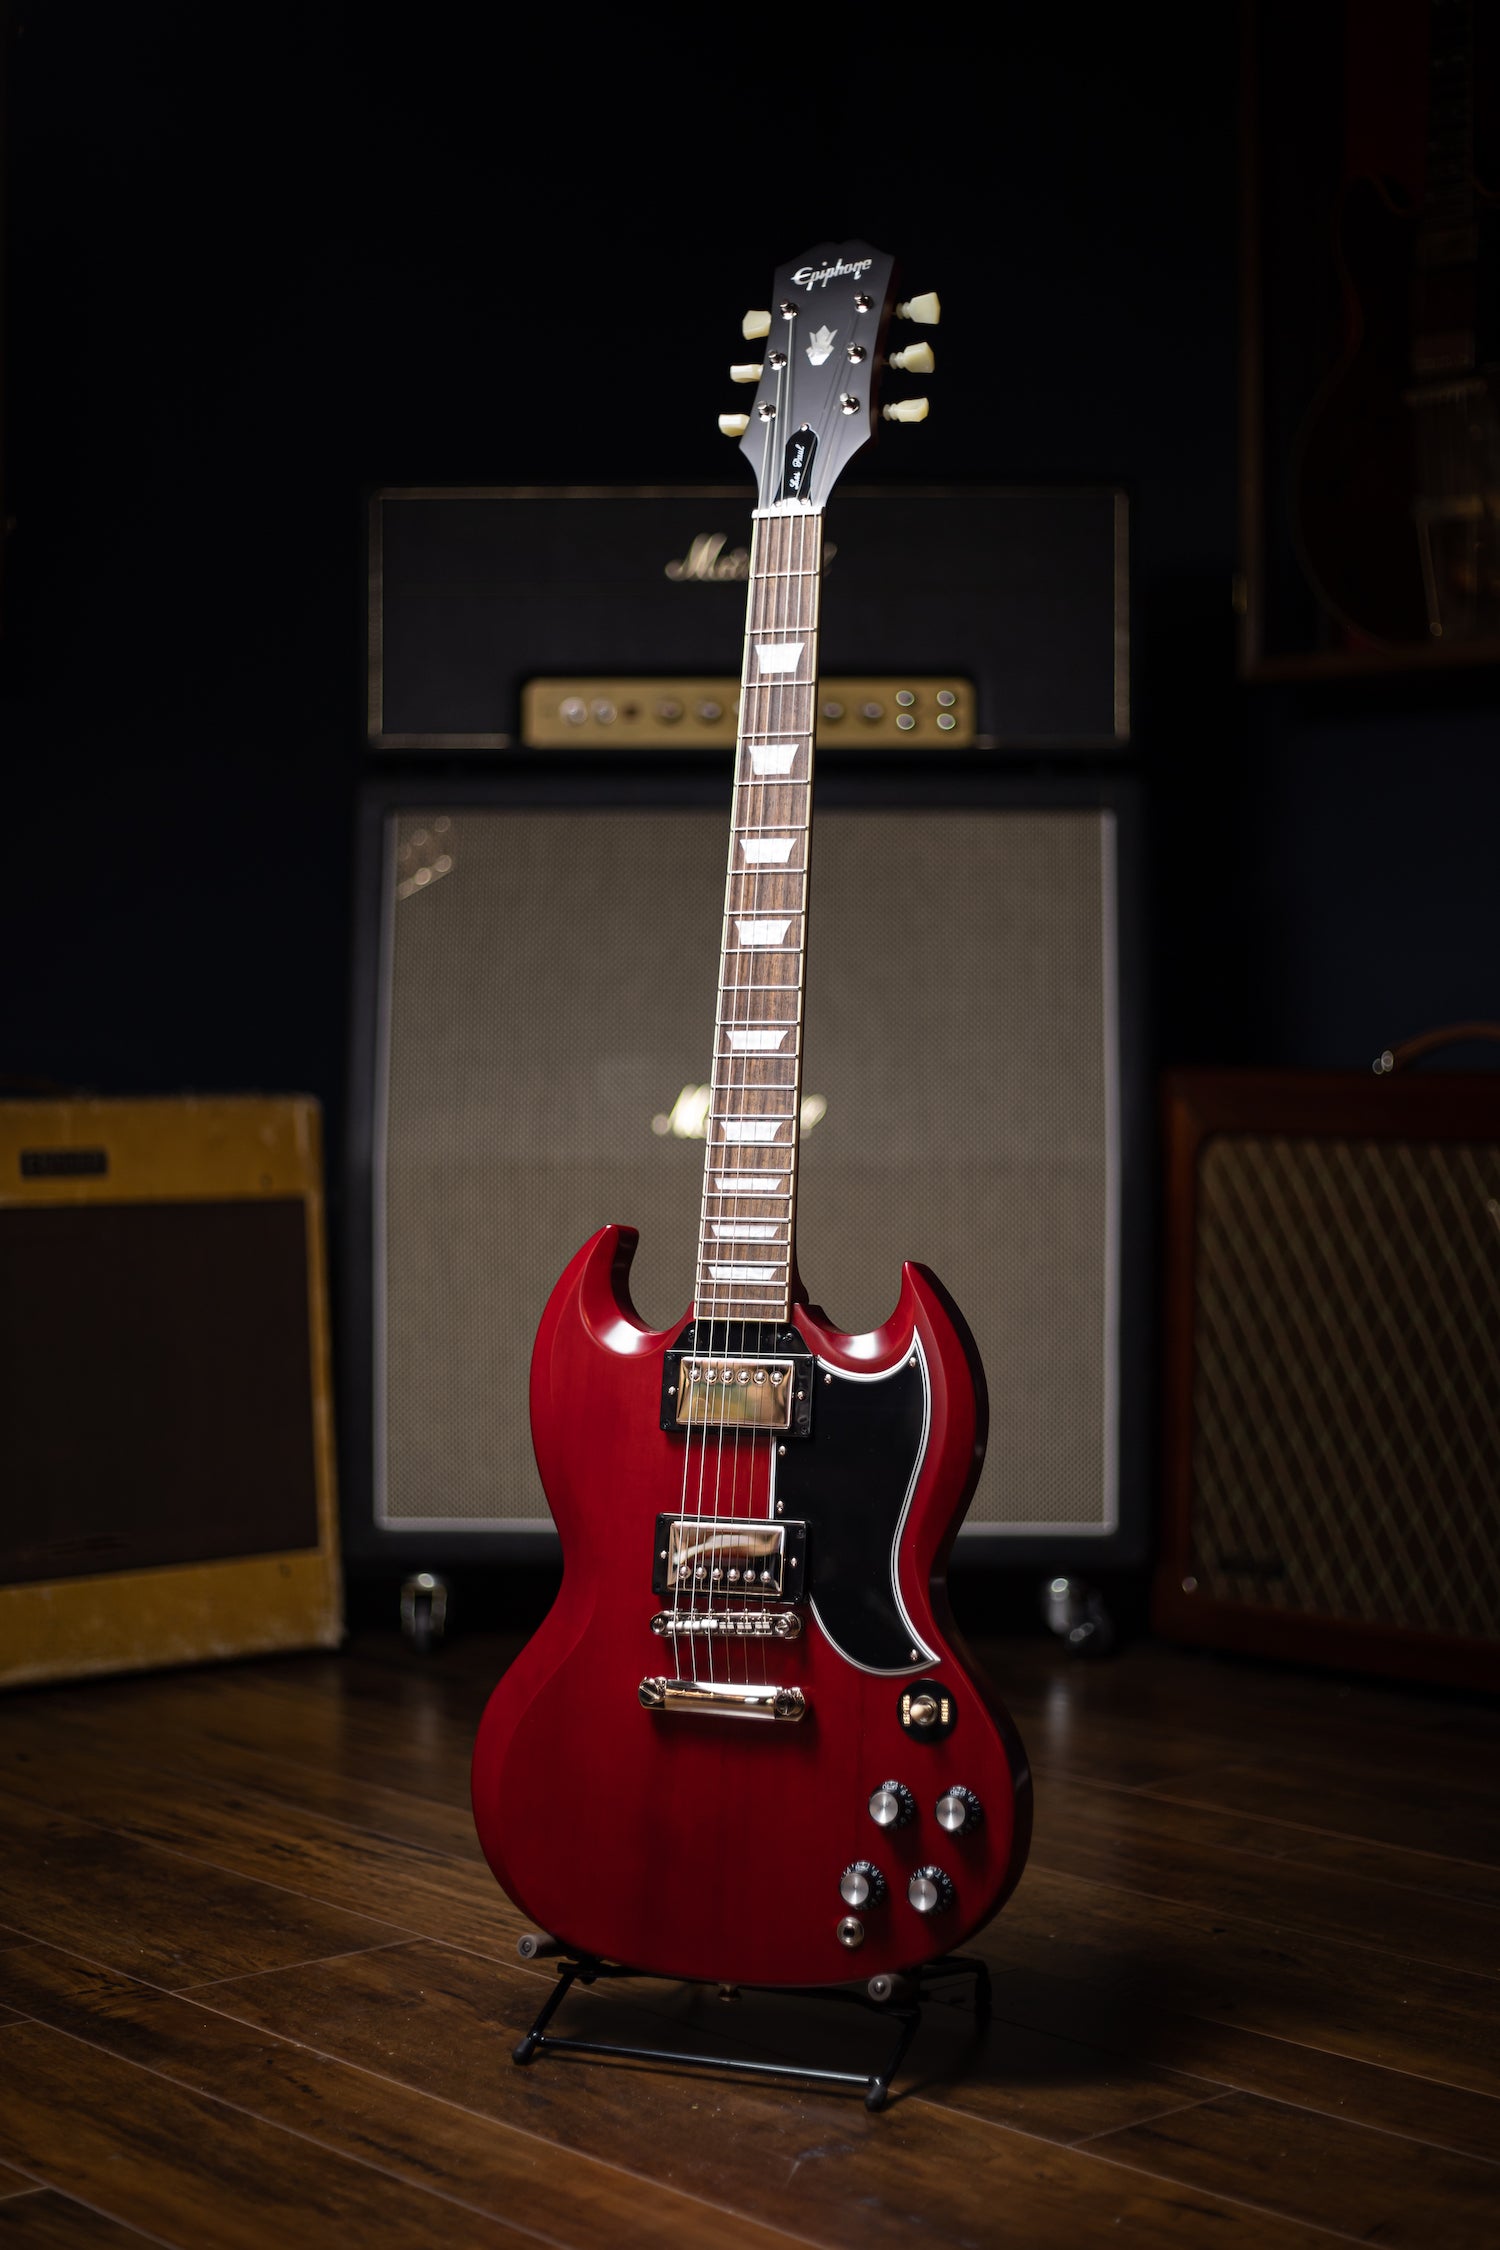 Epiphone 1961 Les Paul SG Standard Electric Guitar - Aged Sixties Cherry